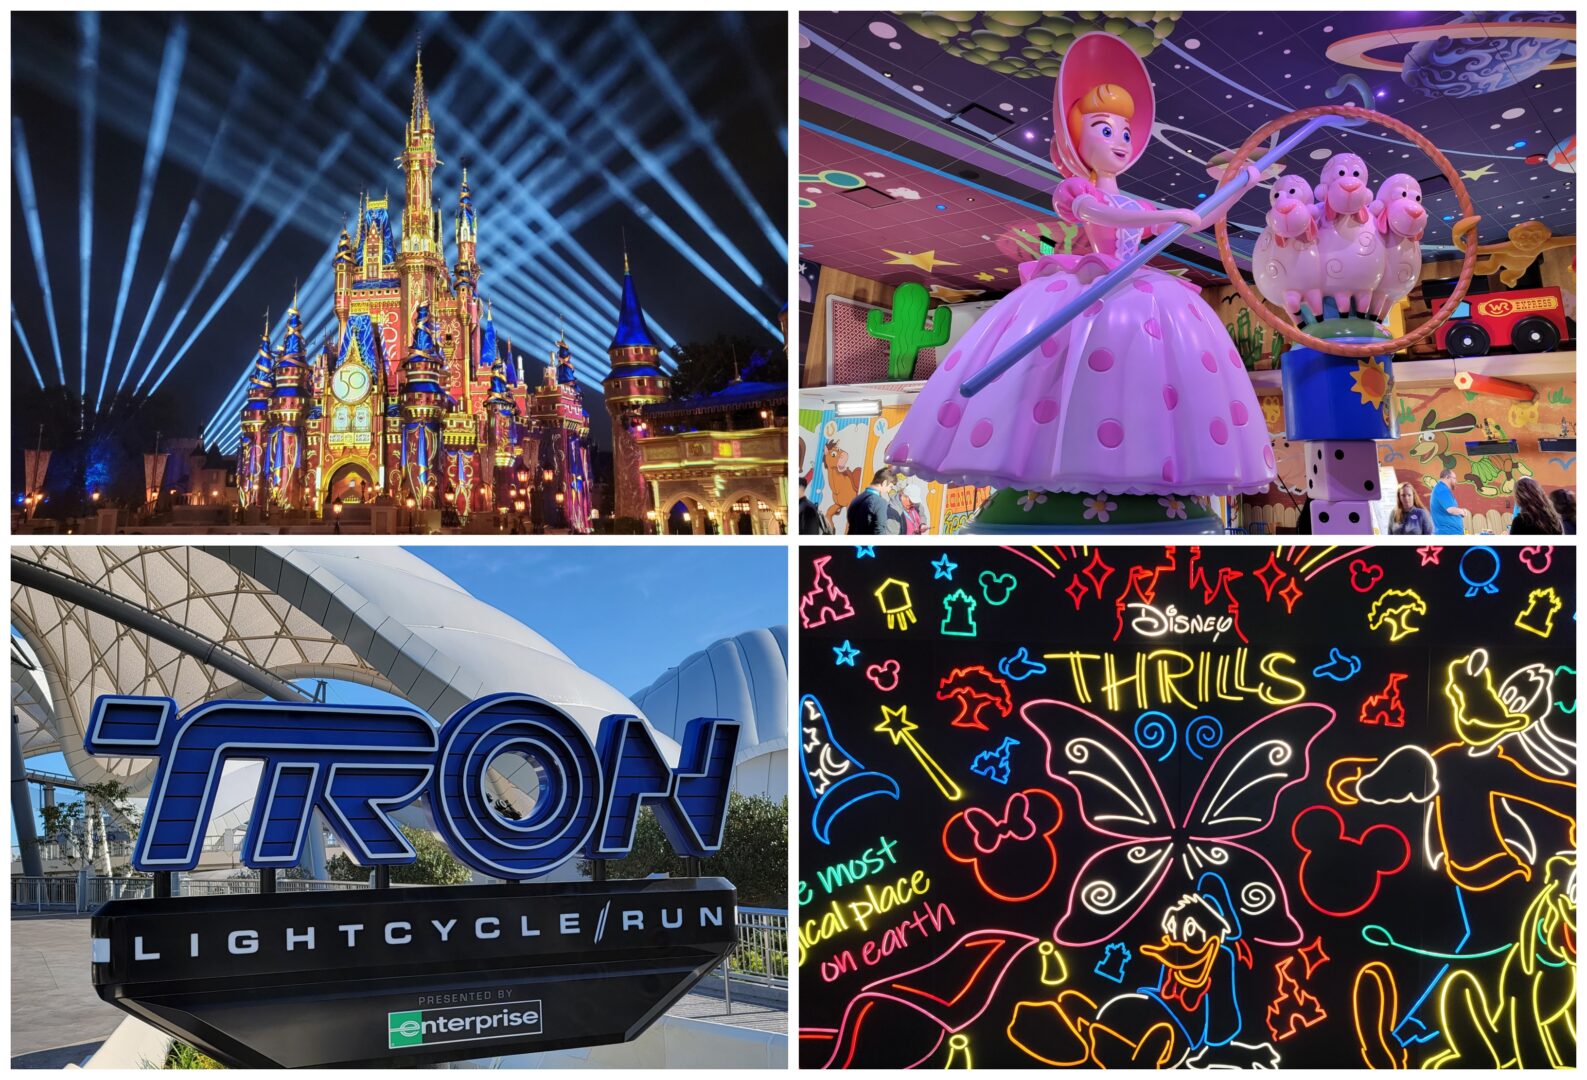 Disney News Highlights: Happily Ever After Dessert Parties, #AllTheDisneyThrills Roundup, All the New BBQ Food Coming to Toy Story Land, Disney Canceled Willow